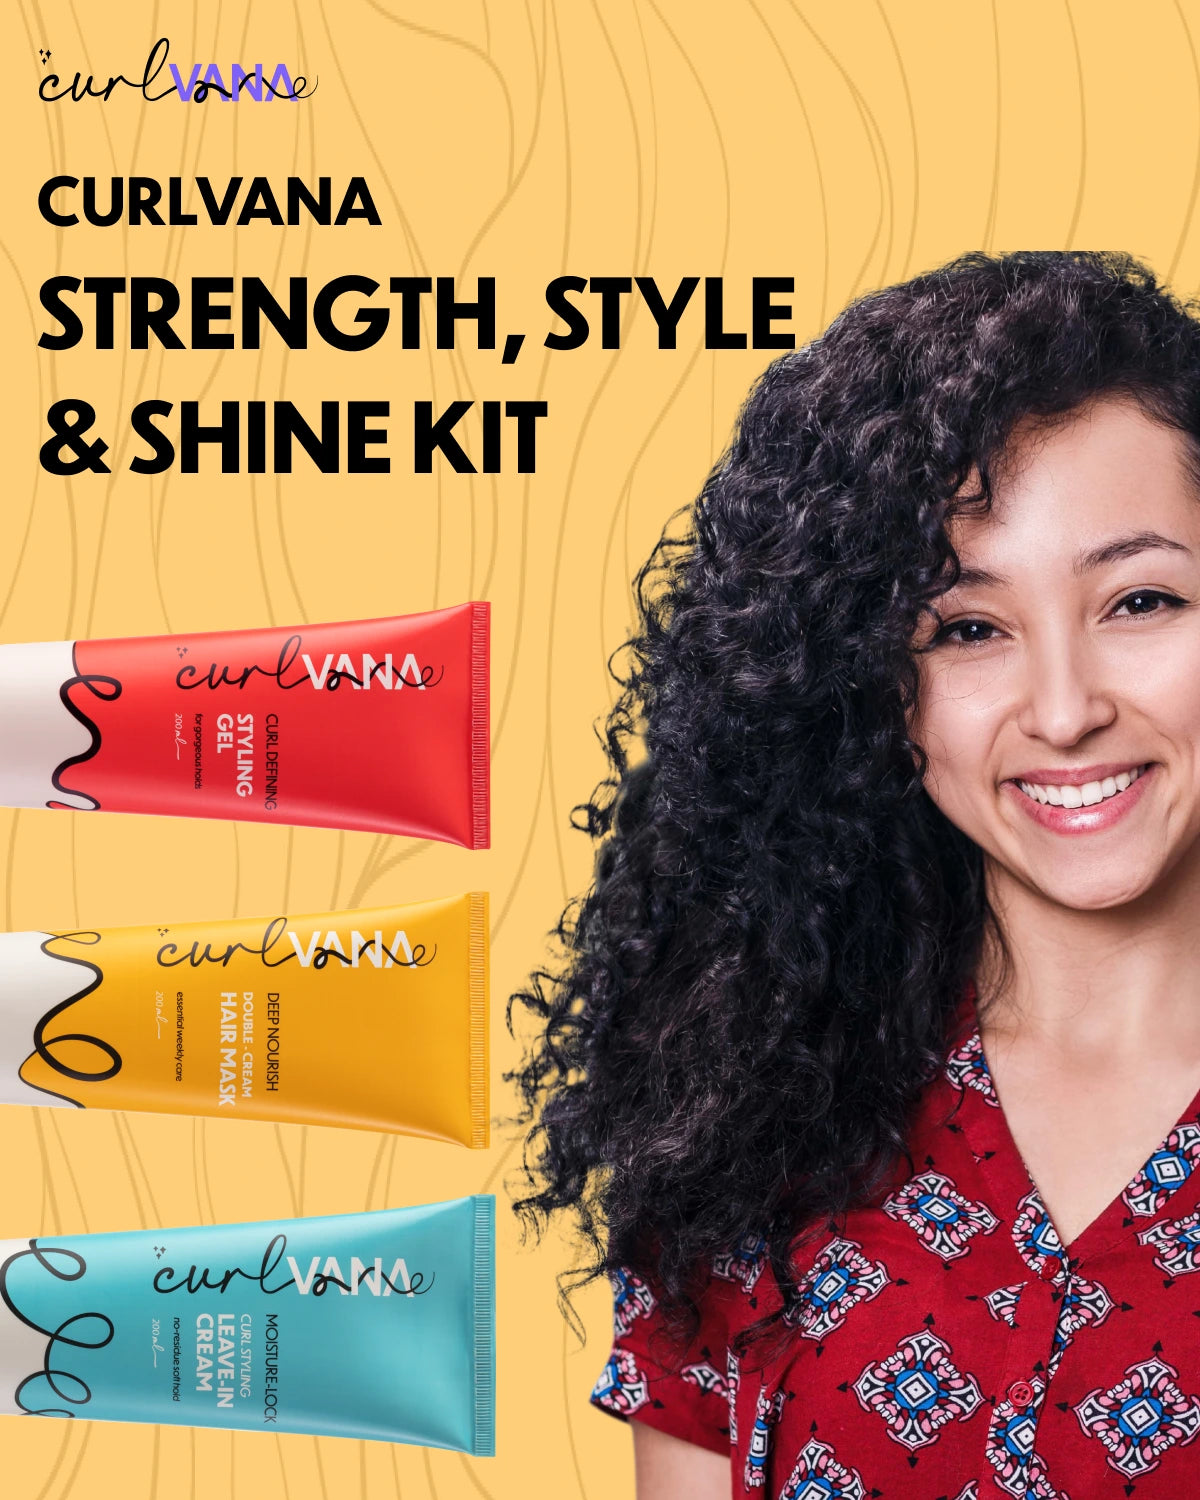 Curlvana Strength, Style & Shine Kit, Leave in cream, Styling gel and Hair Mask - 200ml each.